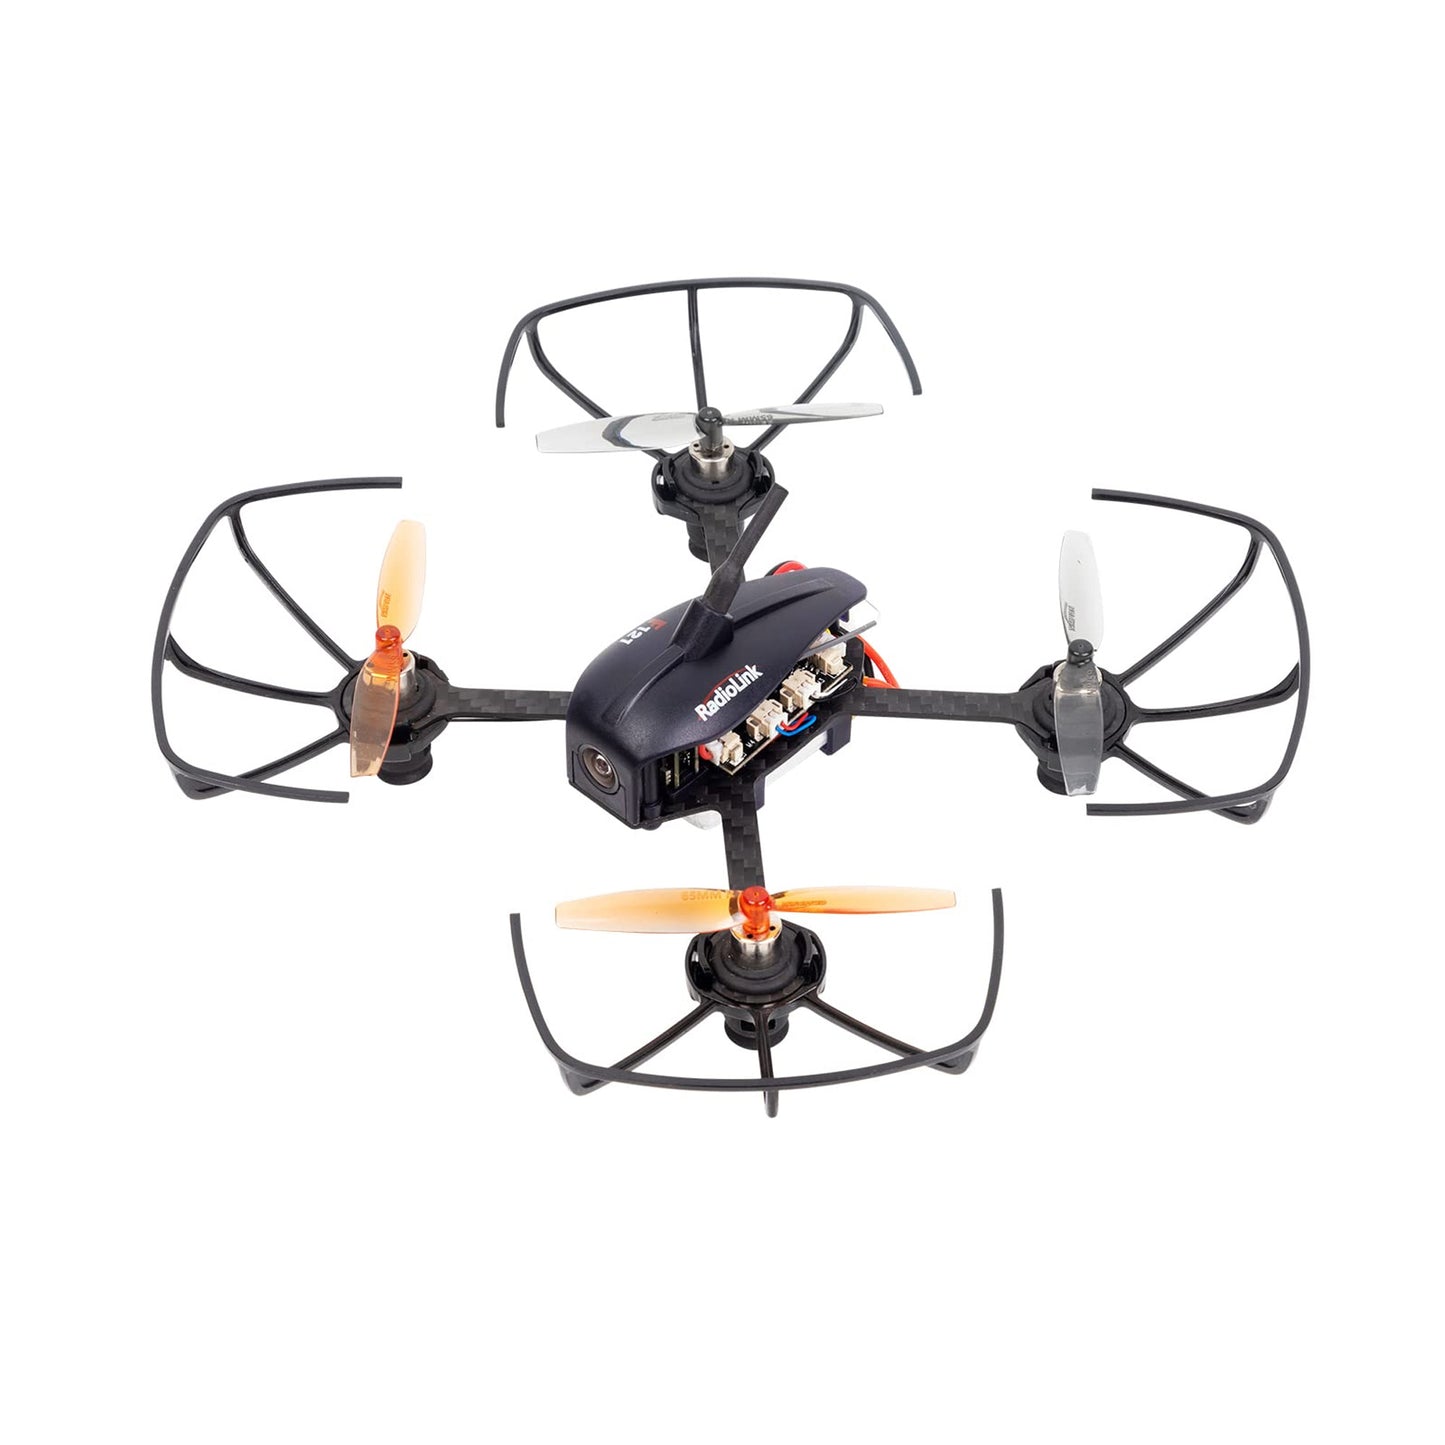 Radiolink F121 FPV Mini RC Drone RTF Advance Version with Camera and Display for Adult and Kids Beginners, 121mm Brushed RC Quadcopter - REES52